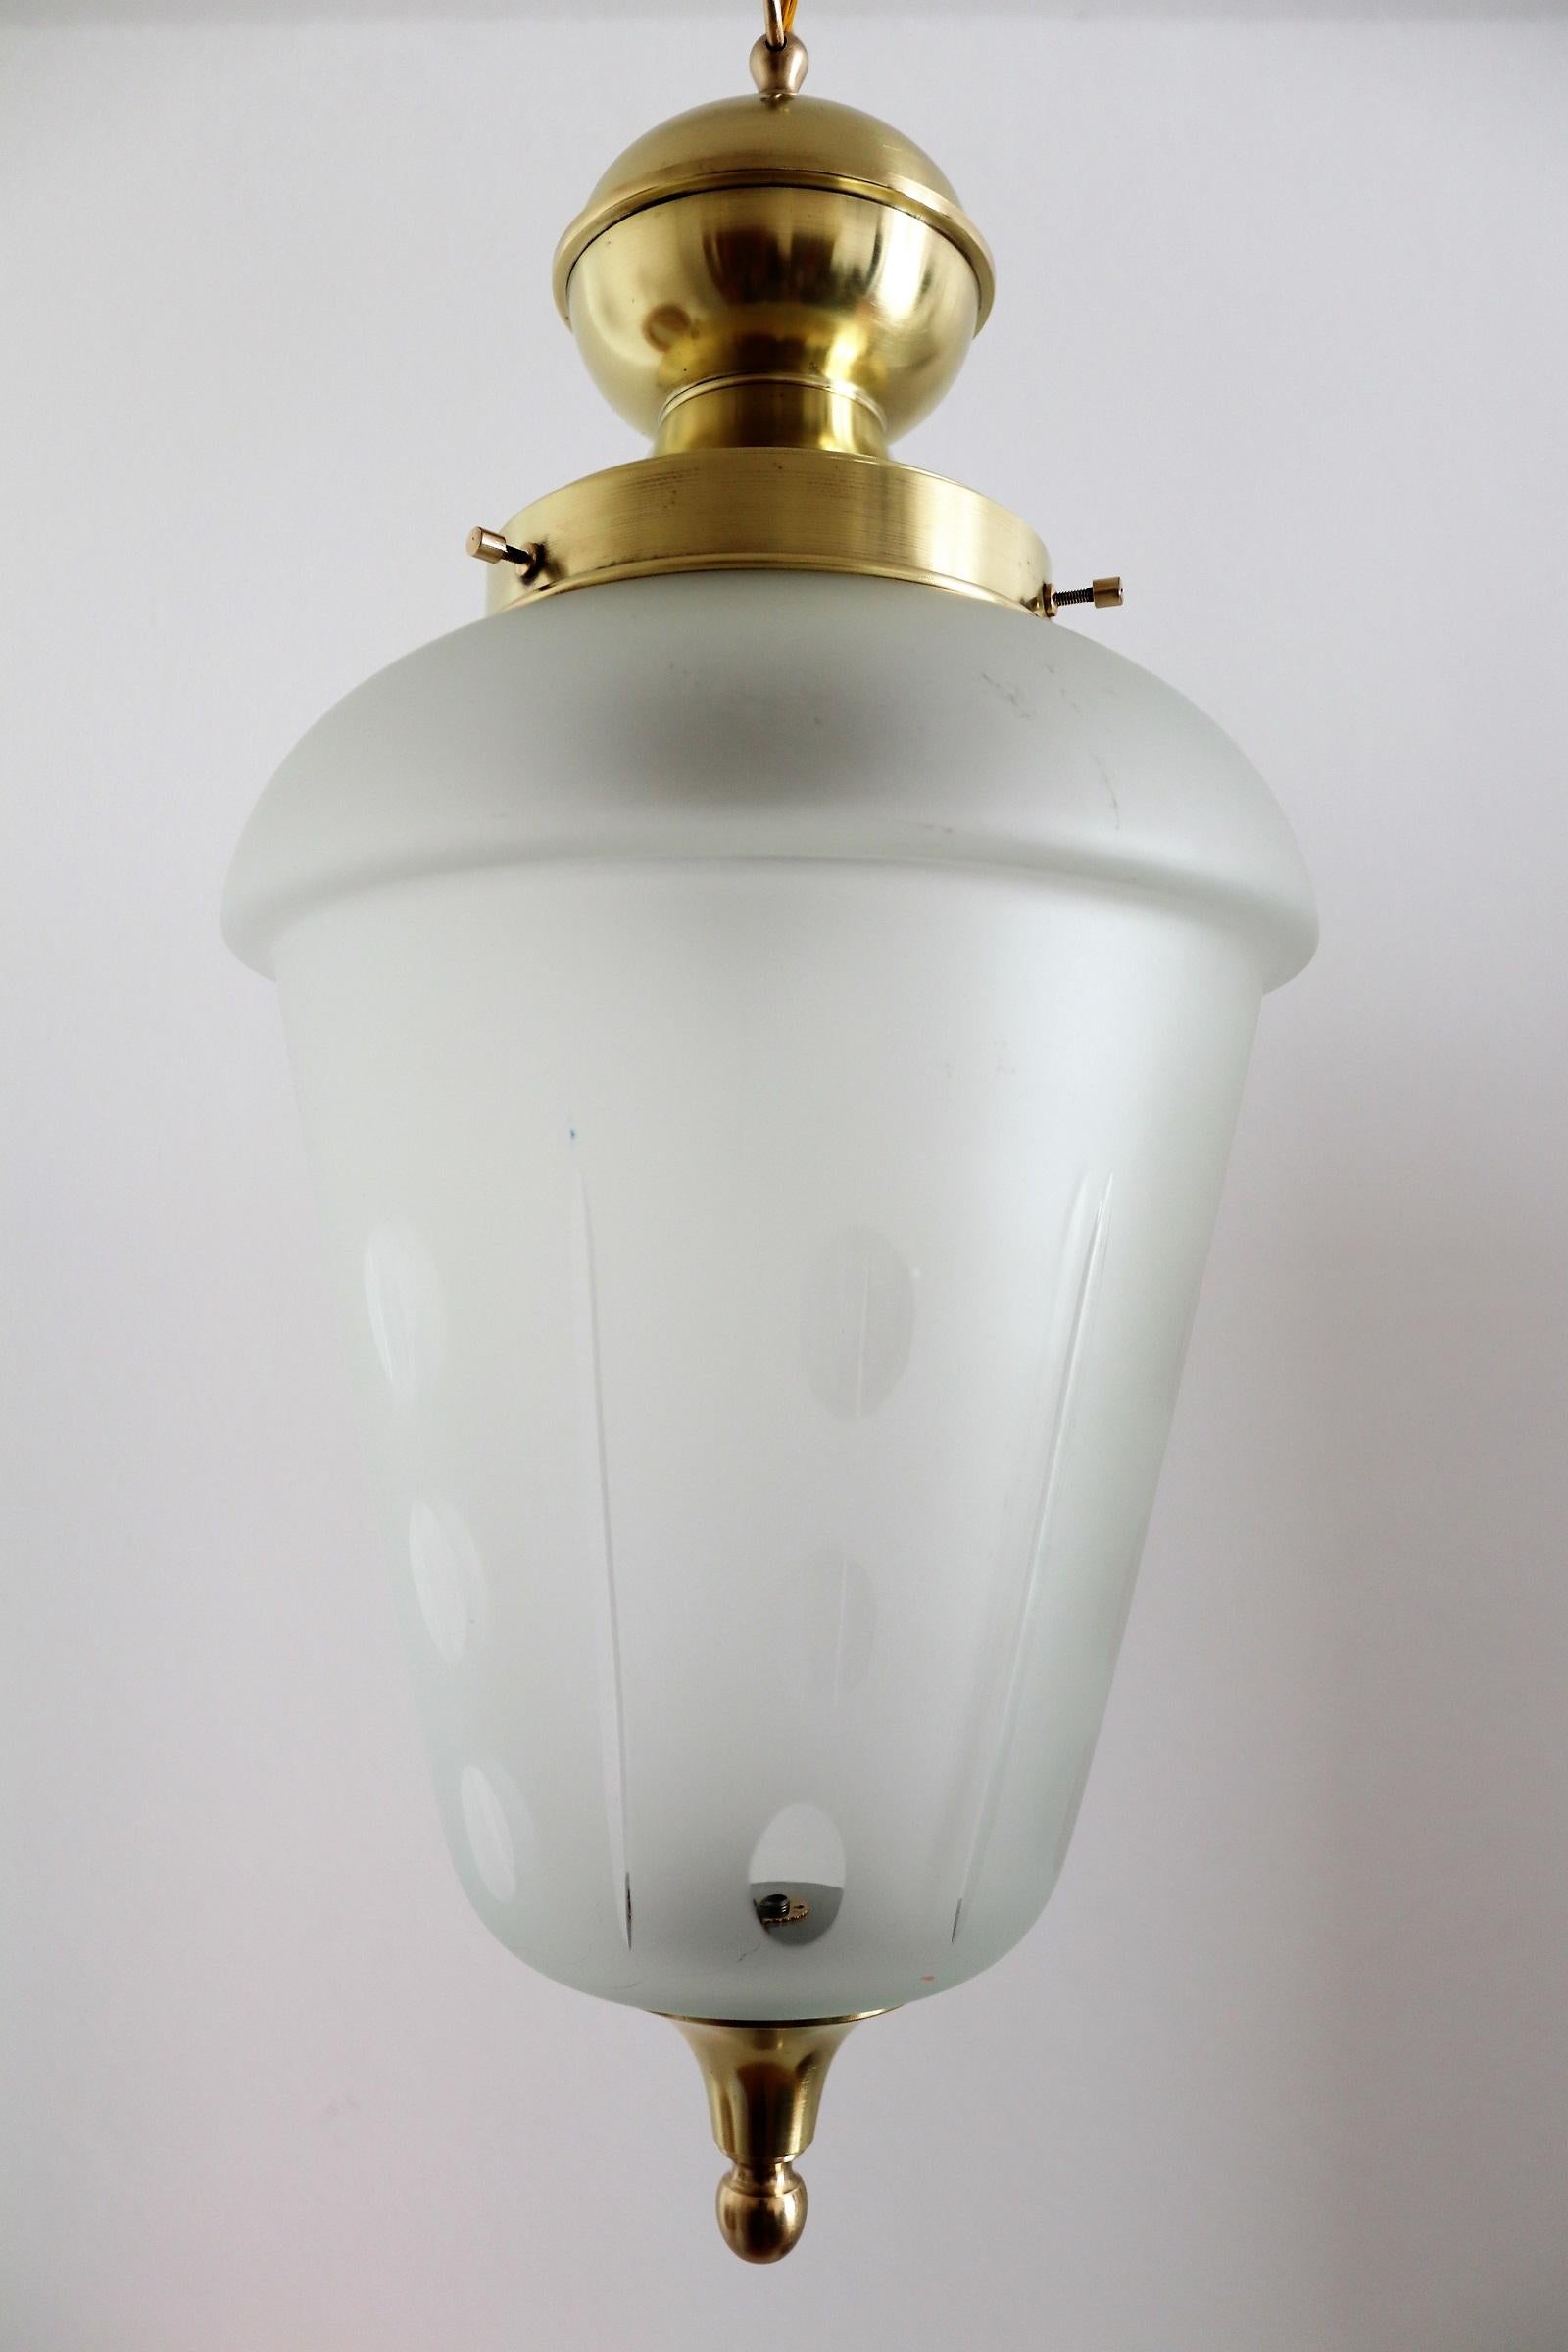 Italian Midcentury Brass and Cut Glass Pendant Lamp or Lantern, 1970s For Sale 4